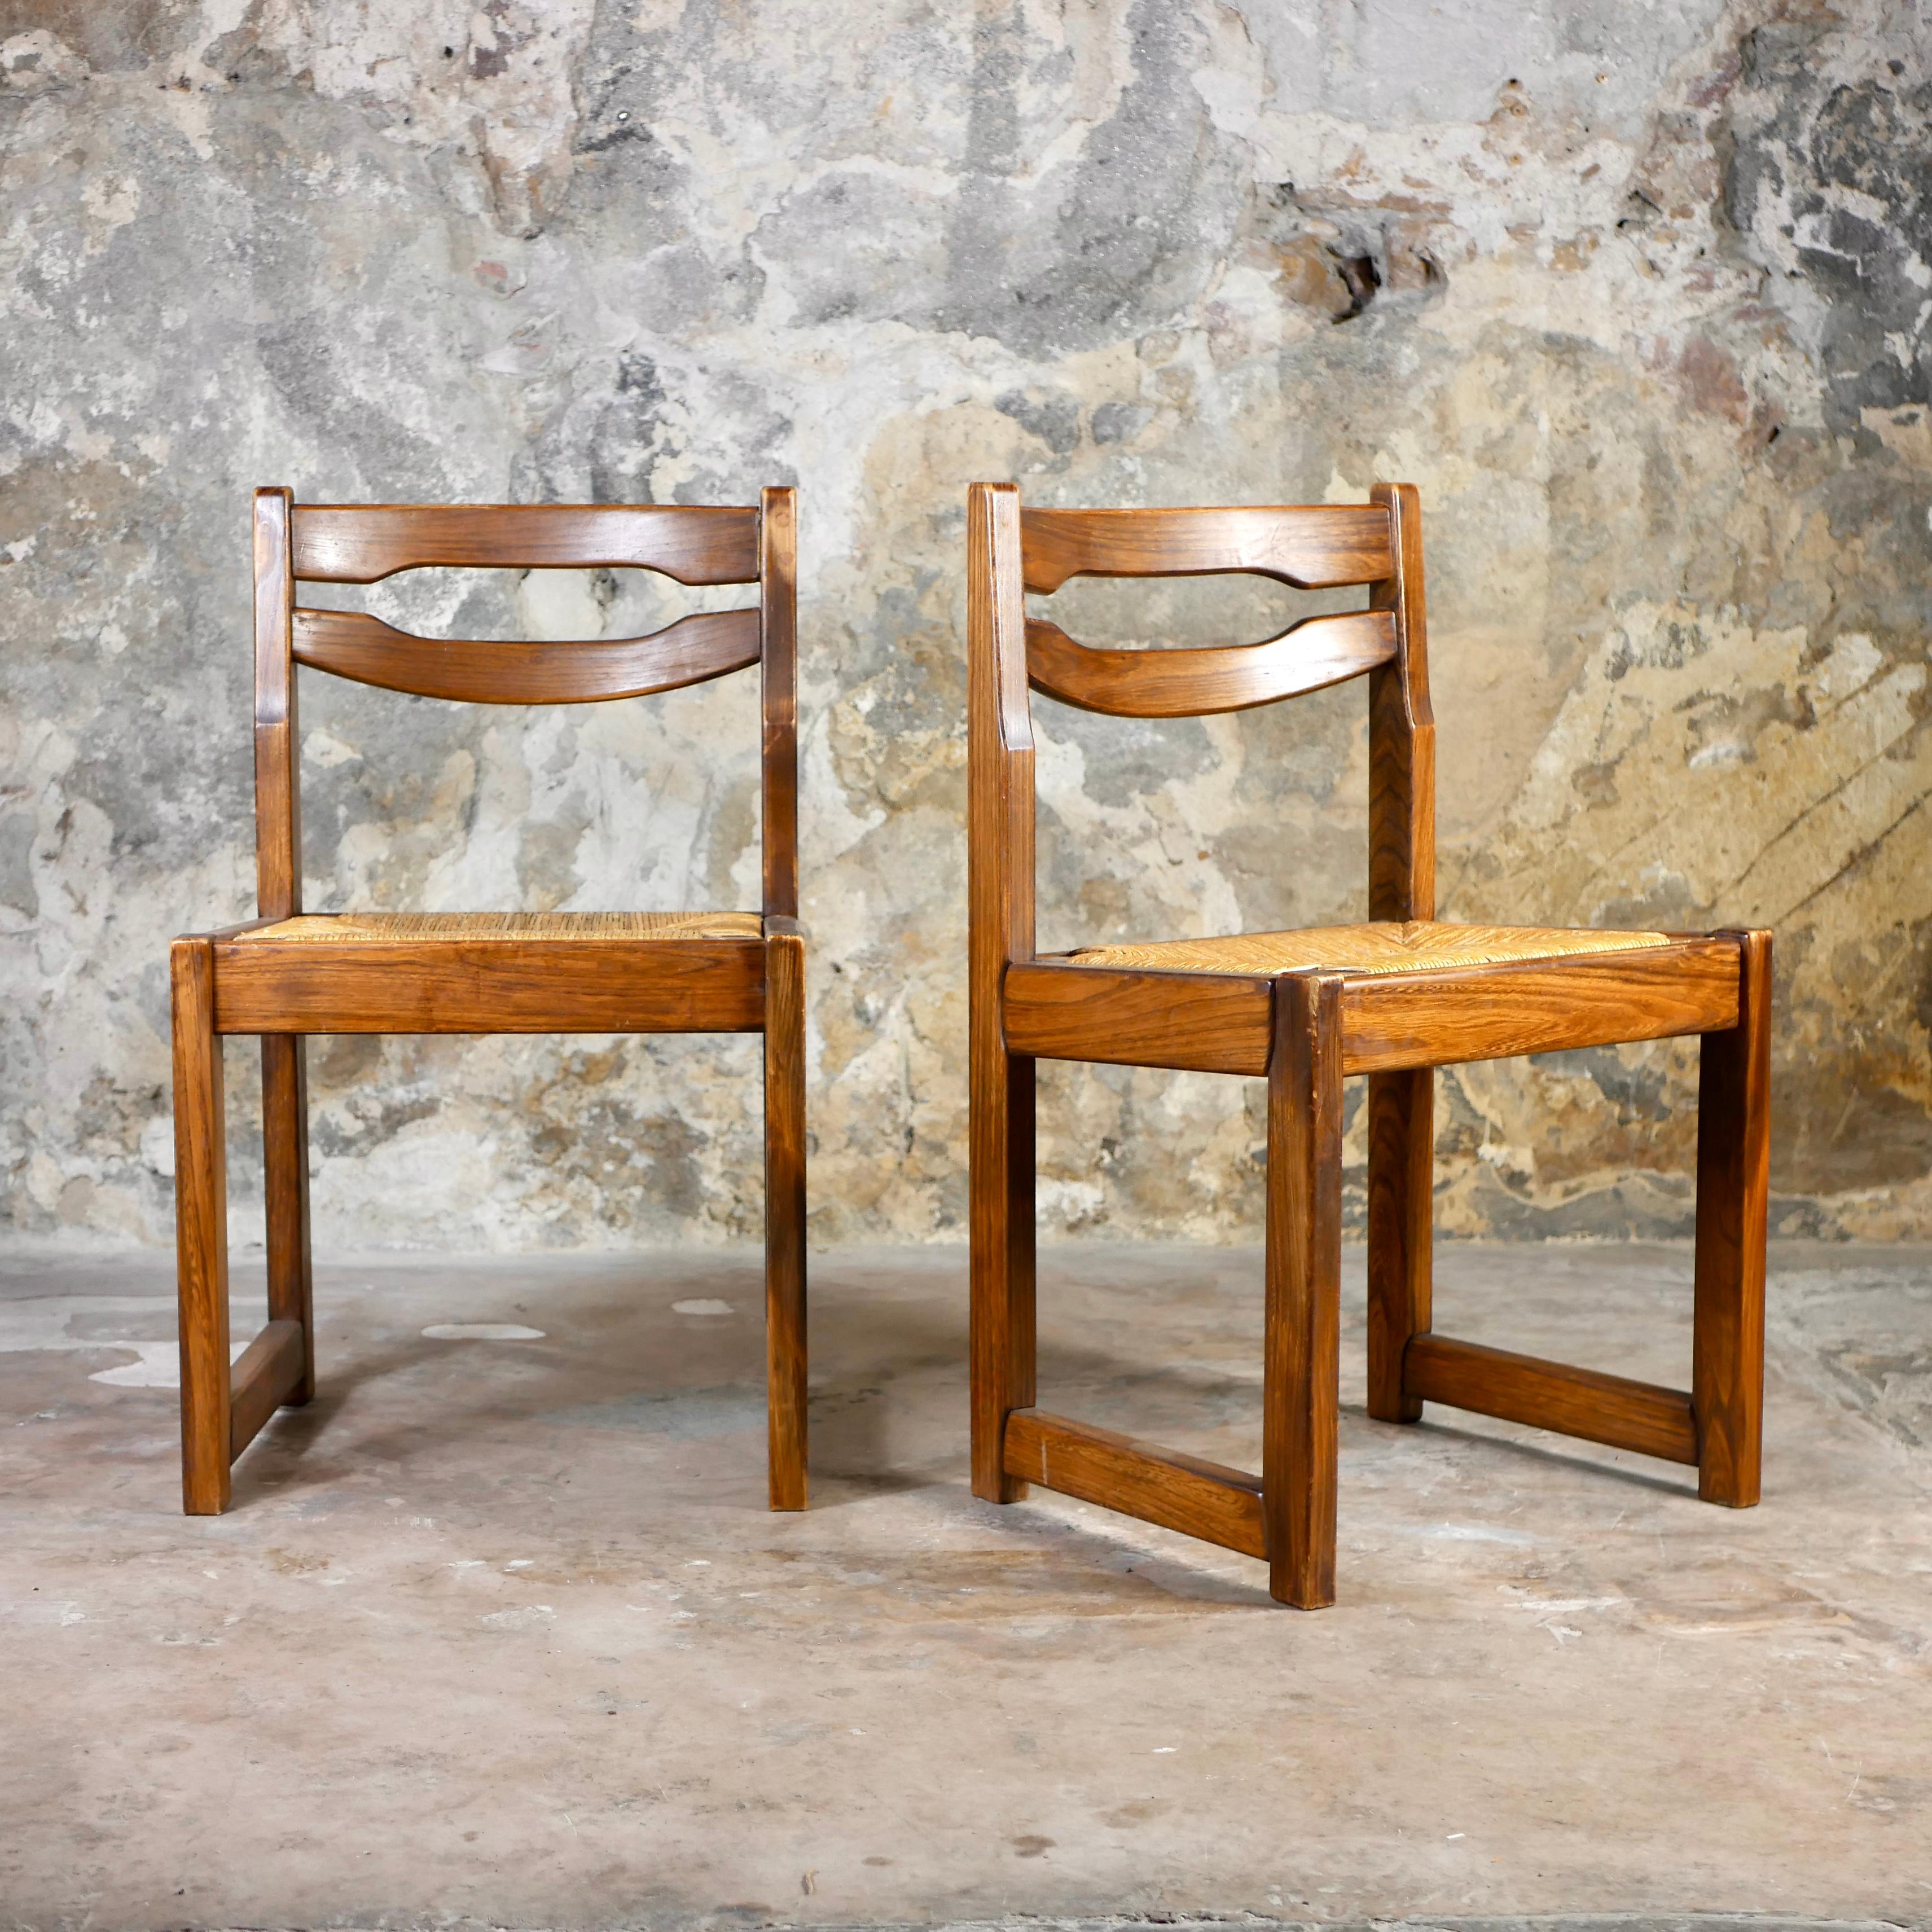 Nice pair of 2 chairs in the style of Maison Regain, made in France in the 1970s.
Rope seat, elm structure. 
We love the wood grain and tint.
Overall good condition, rope used, some traces of repair on the wood.
Dimensions : H80, W50, D43